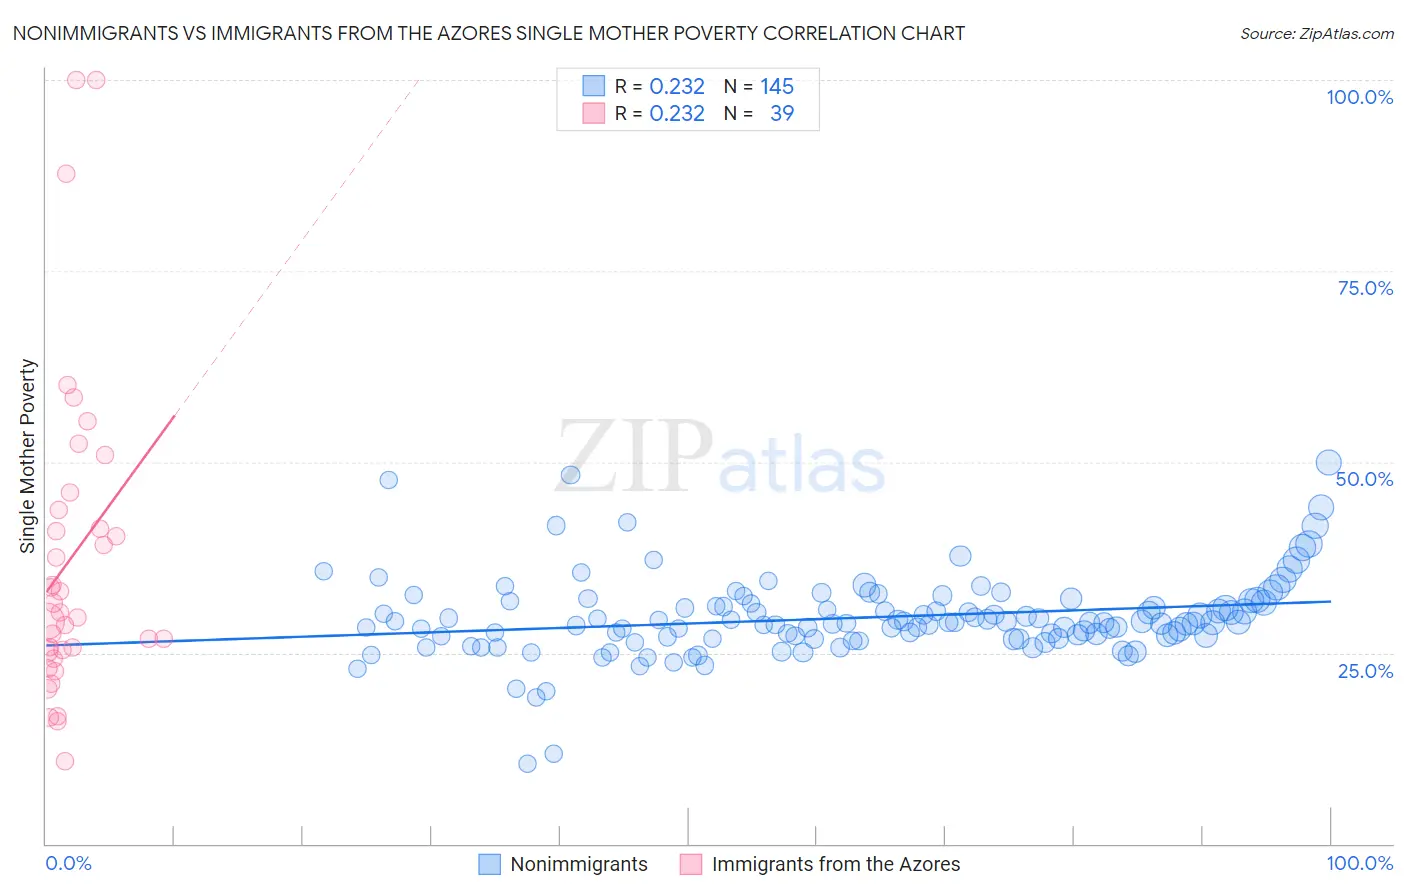 Nonimmigrants vs Immigrants from the Azores Single Mother Poverty